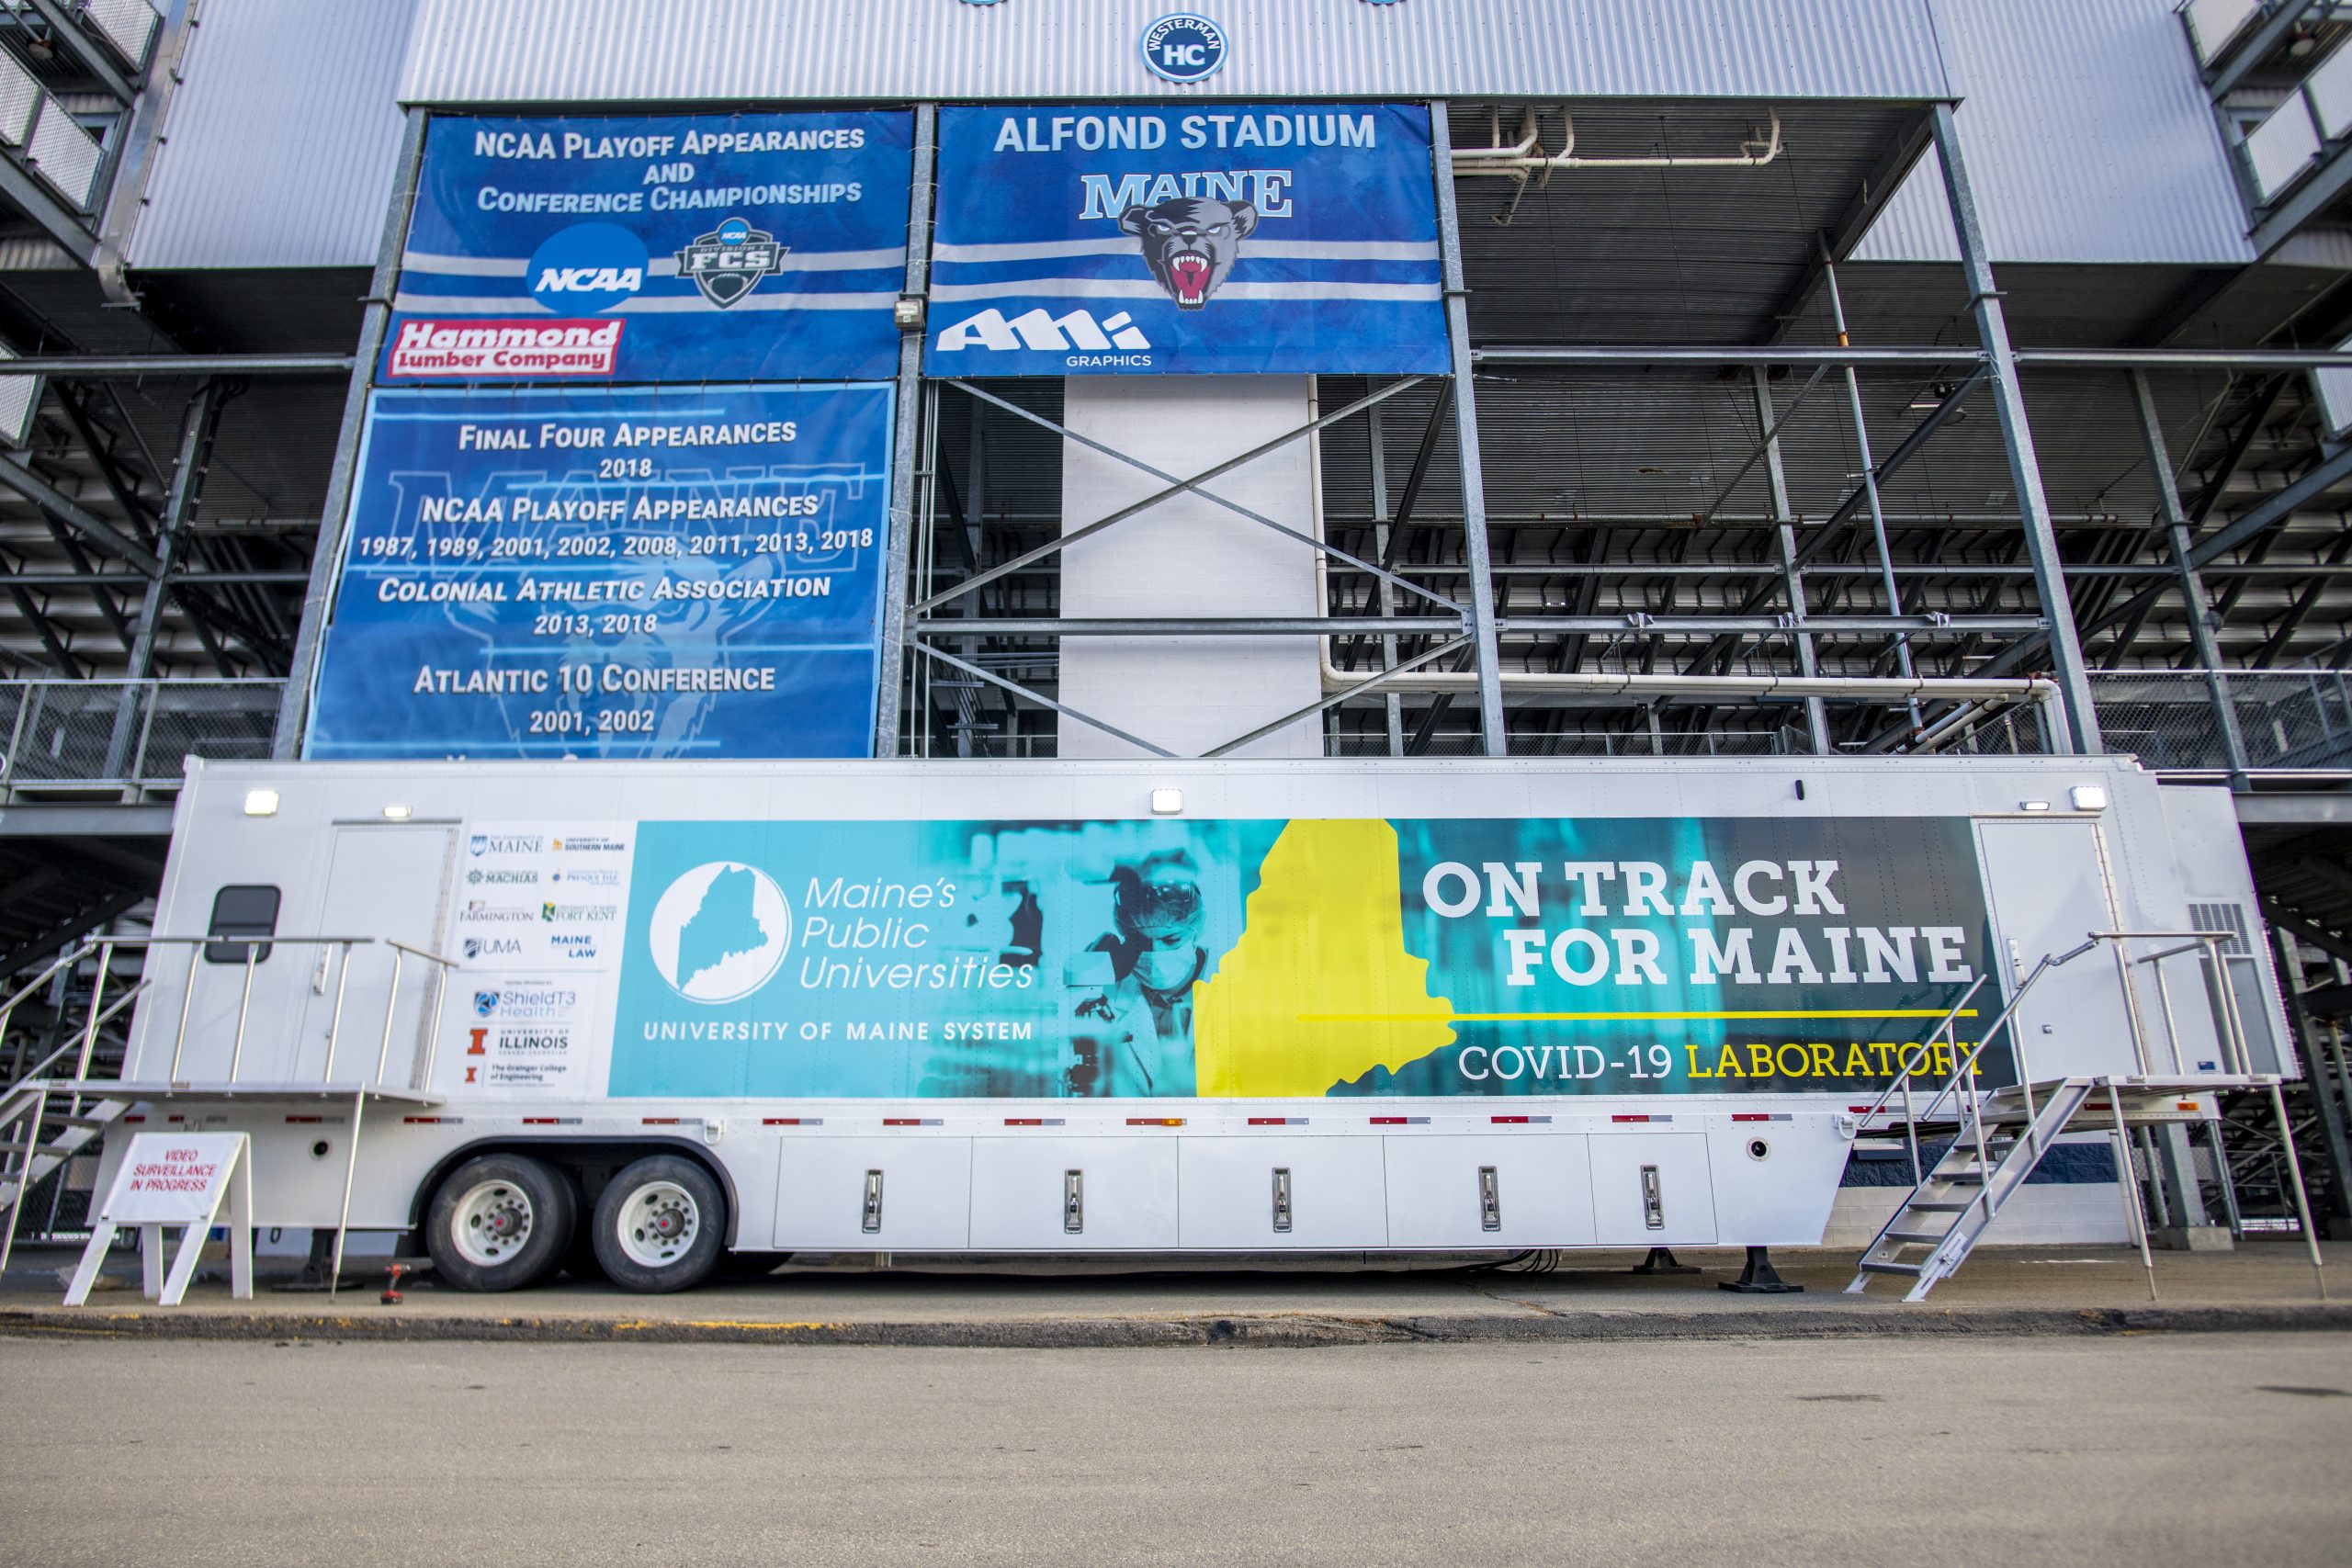 Photo of a mobile COVID-19 testing lab outside of Alfond Stadium at the University of Maine.